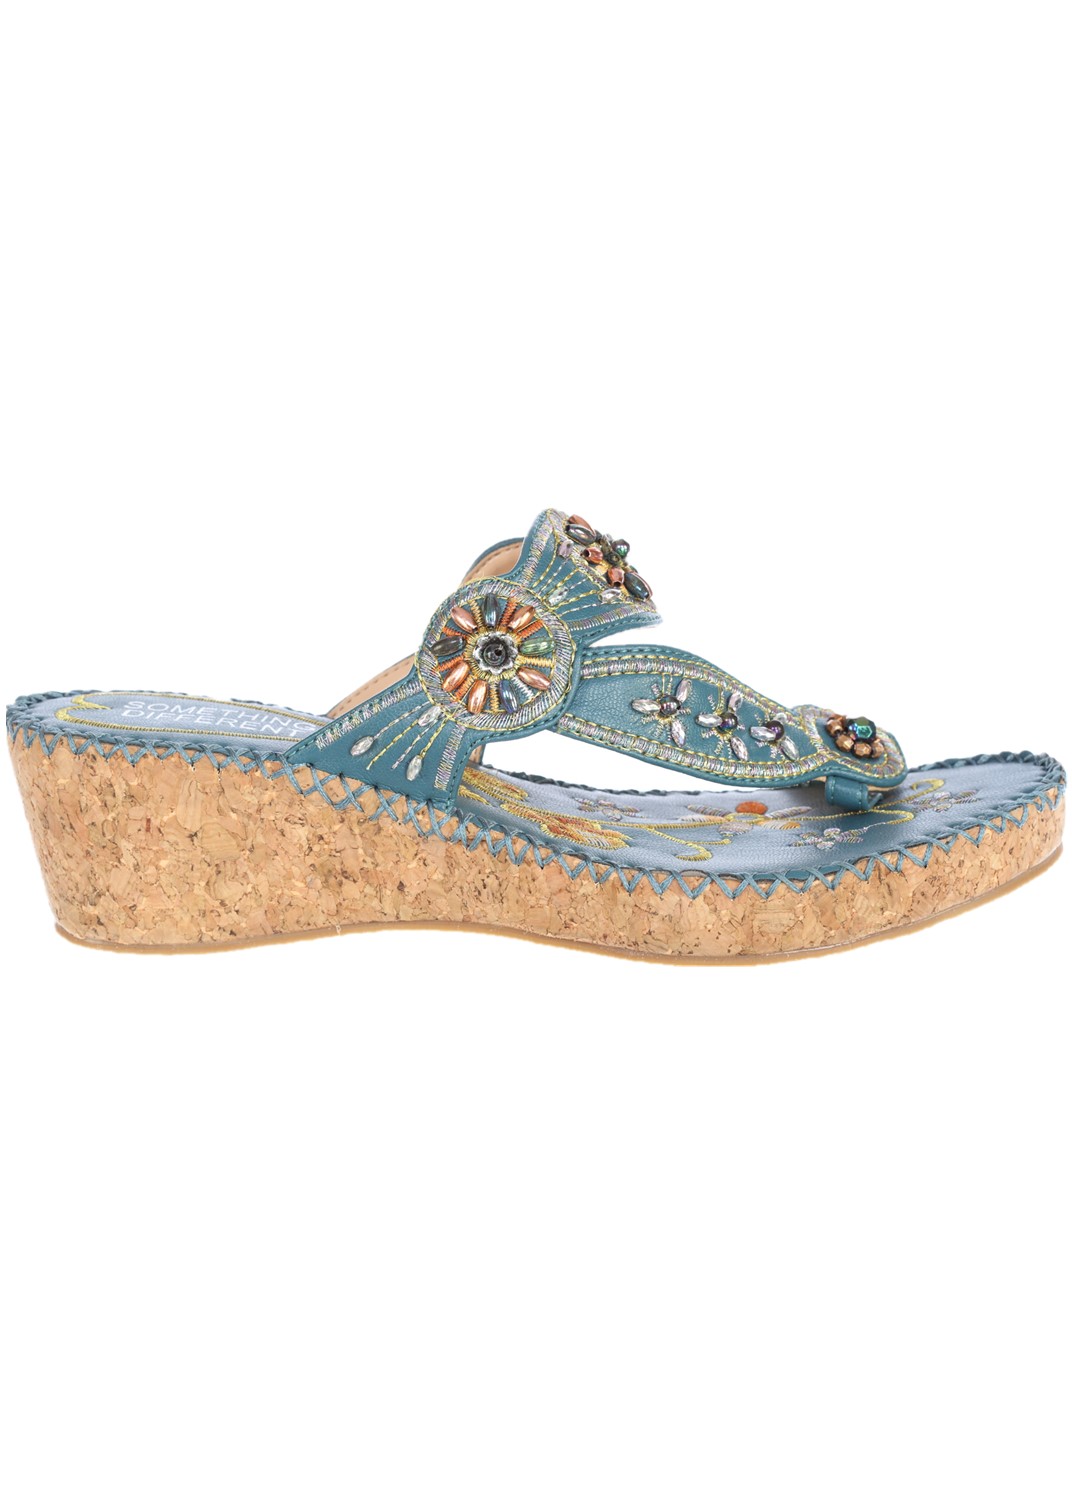 Women's Casual Embroided Beaded Wedge Sandals-Blue-7 - image 1 of 3